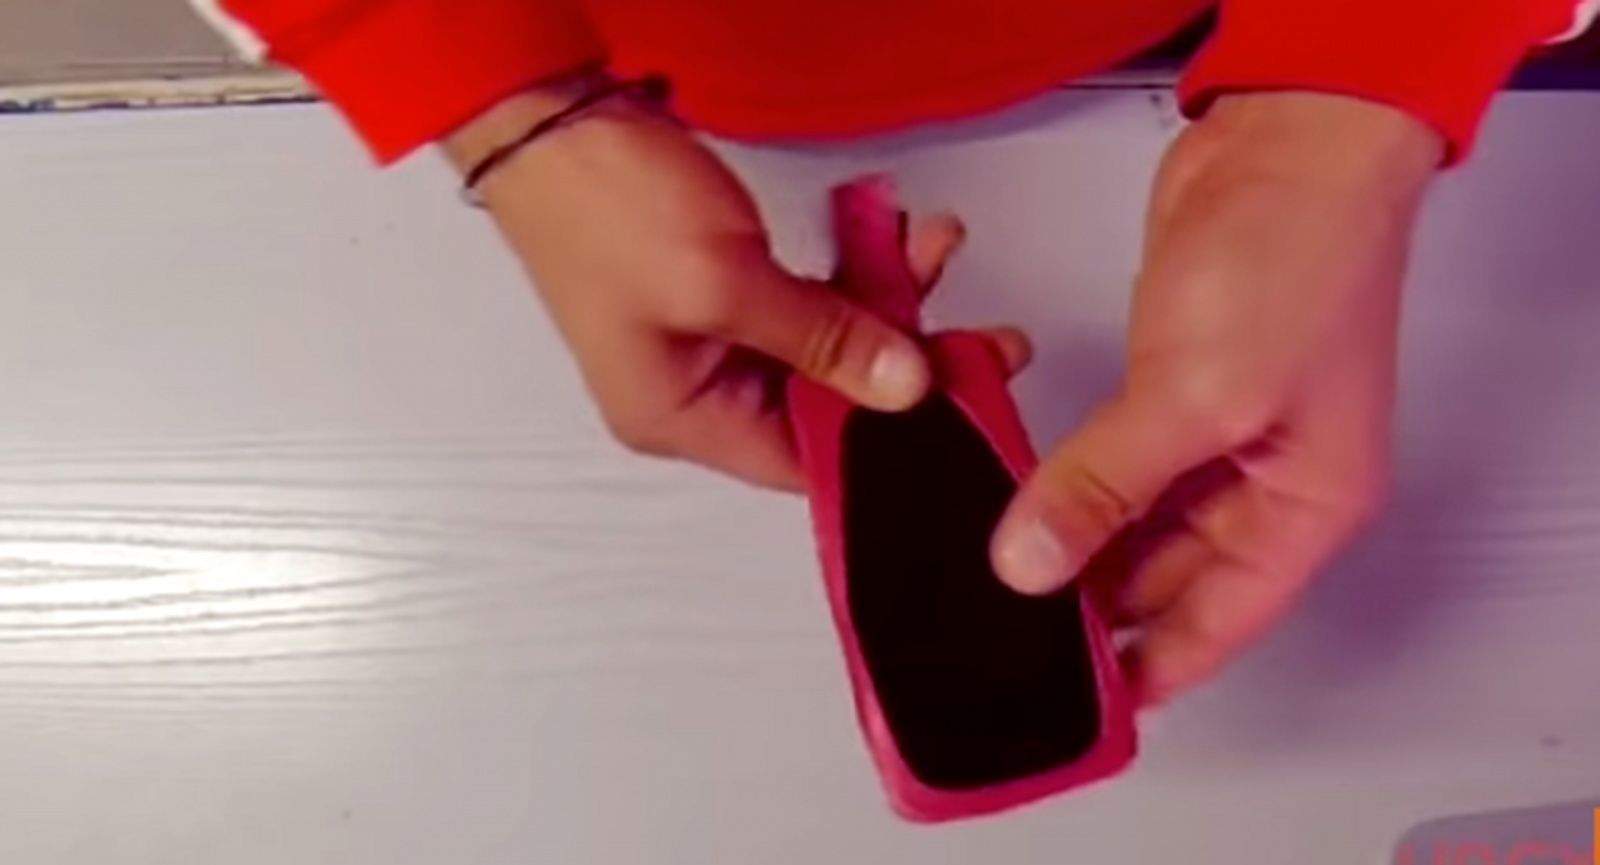 A balloon can make a quick iPhone cover in a pinch, but is not recommended. Photo: Storyful/YouTube